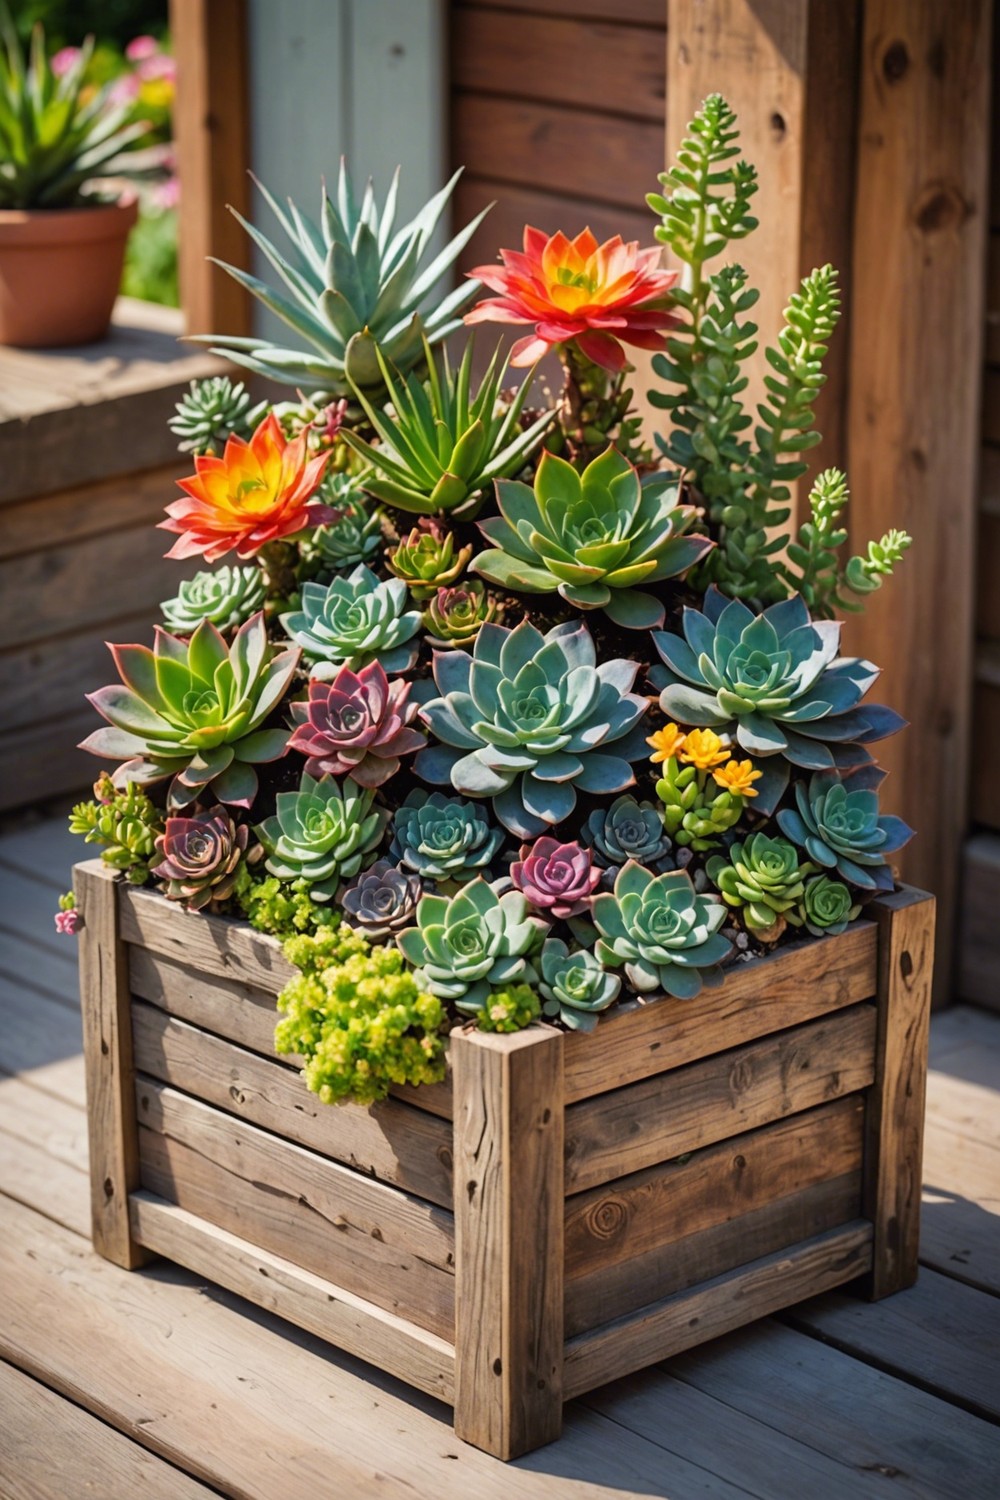 Colorful Mix in a Rustic Wooden Planter